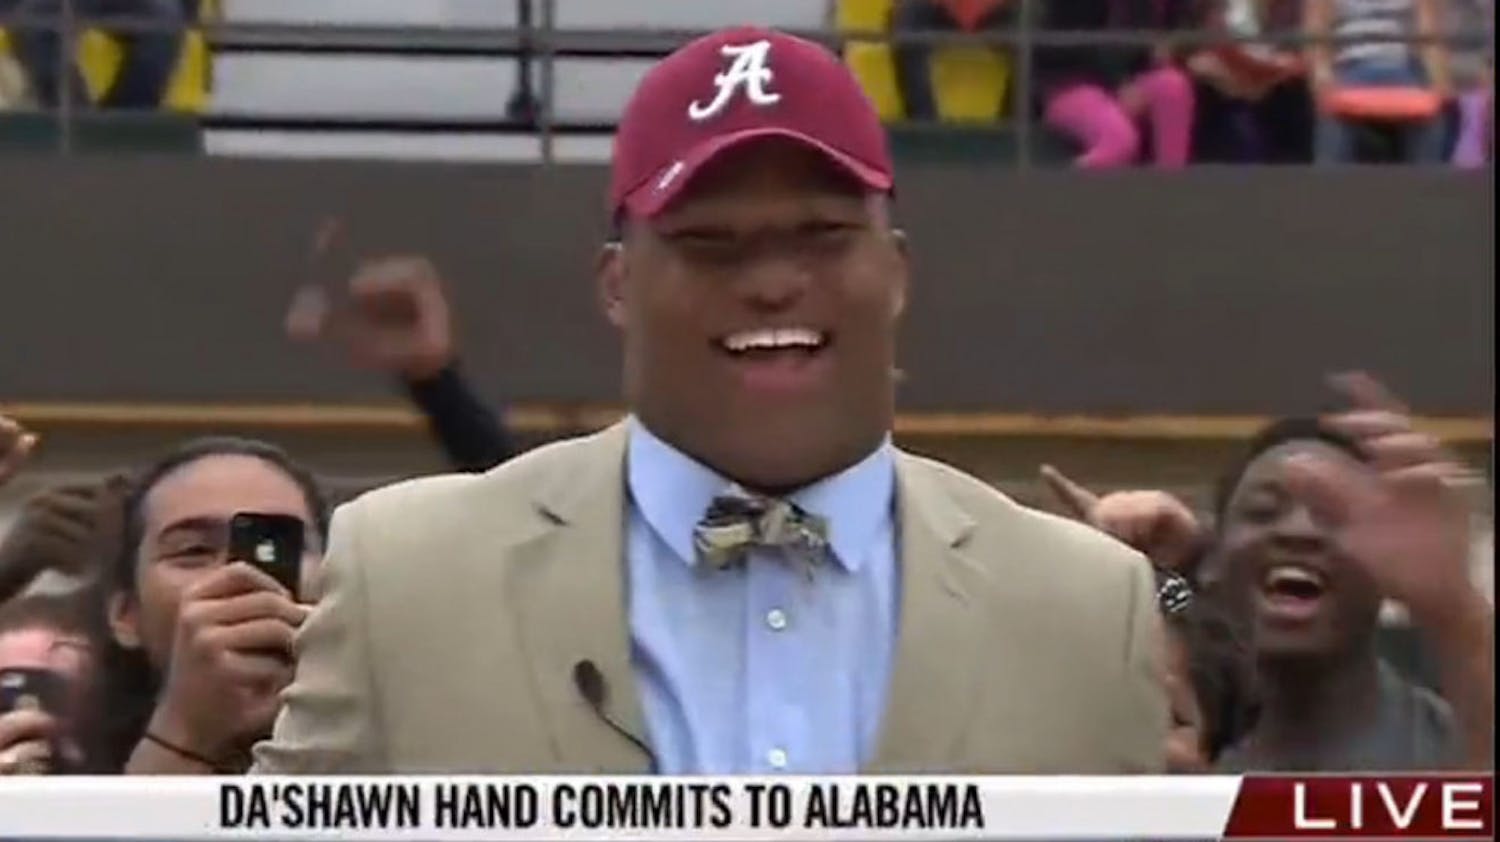 Da’Shawn Hand, the No. 1 recruit in the Class of 2014 according to Rivals.com, celebrates after committing to Alabama over Florida and Michigan on Thursday afternoon at a ceremony at Woodbridge (Va.) Senior High.